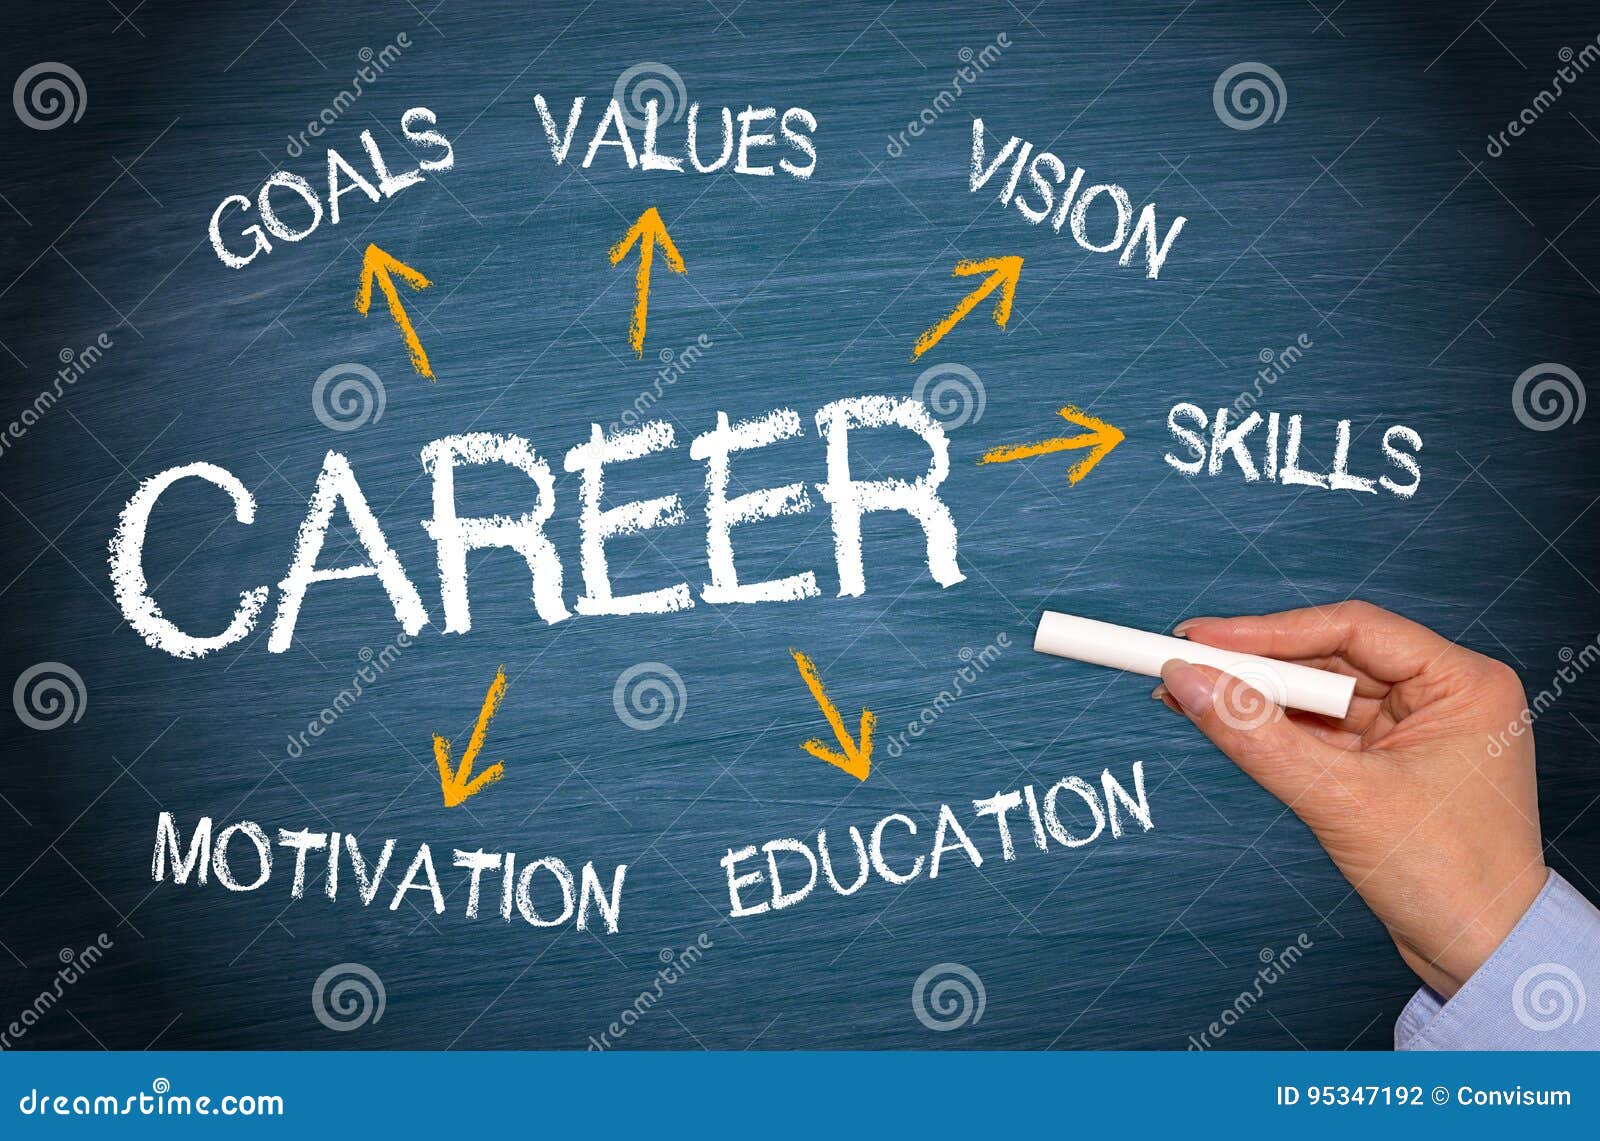 career business concept